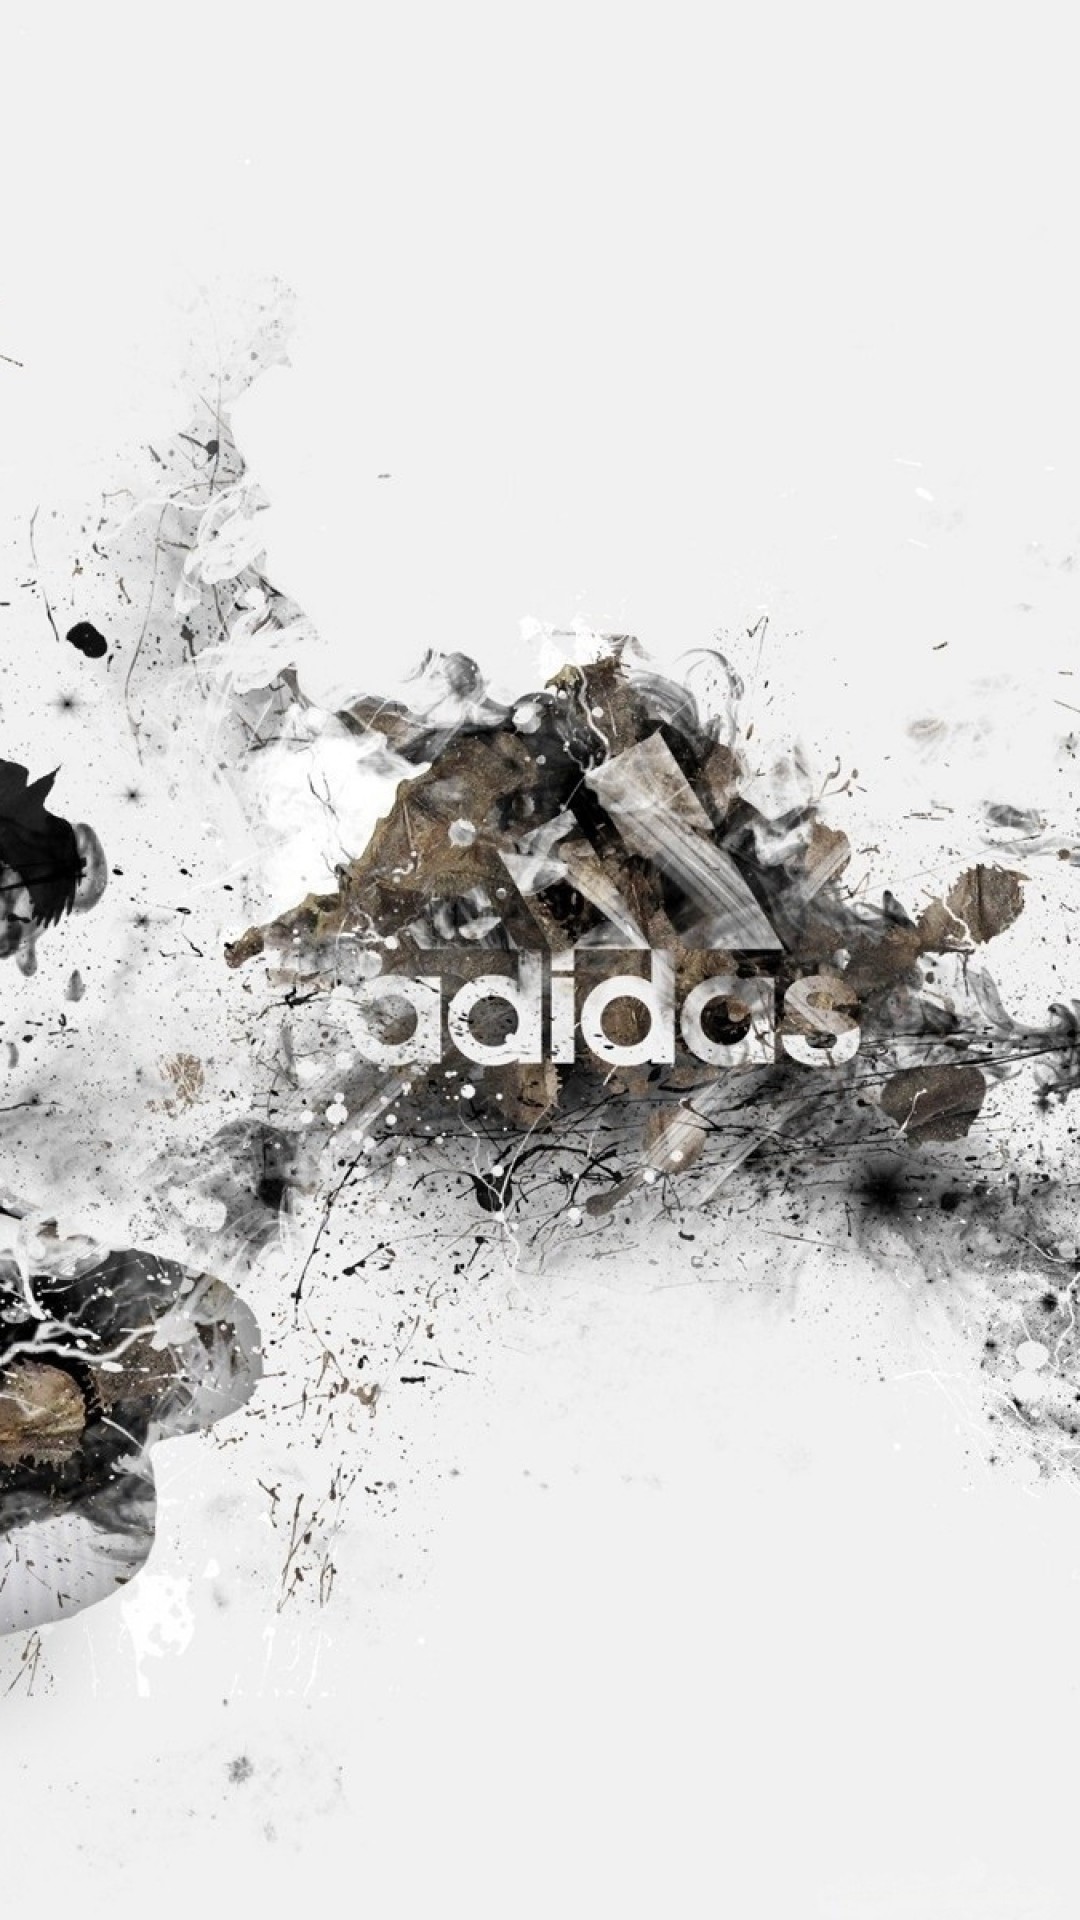 1080x1920 adidas iphone sneakers stylish brand wallpaper hd wallpapers desktop images  free windows wallpapers amazing picture artwork lovely 1080Ã1920 Wallpaper  HD